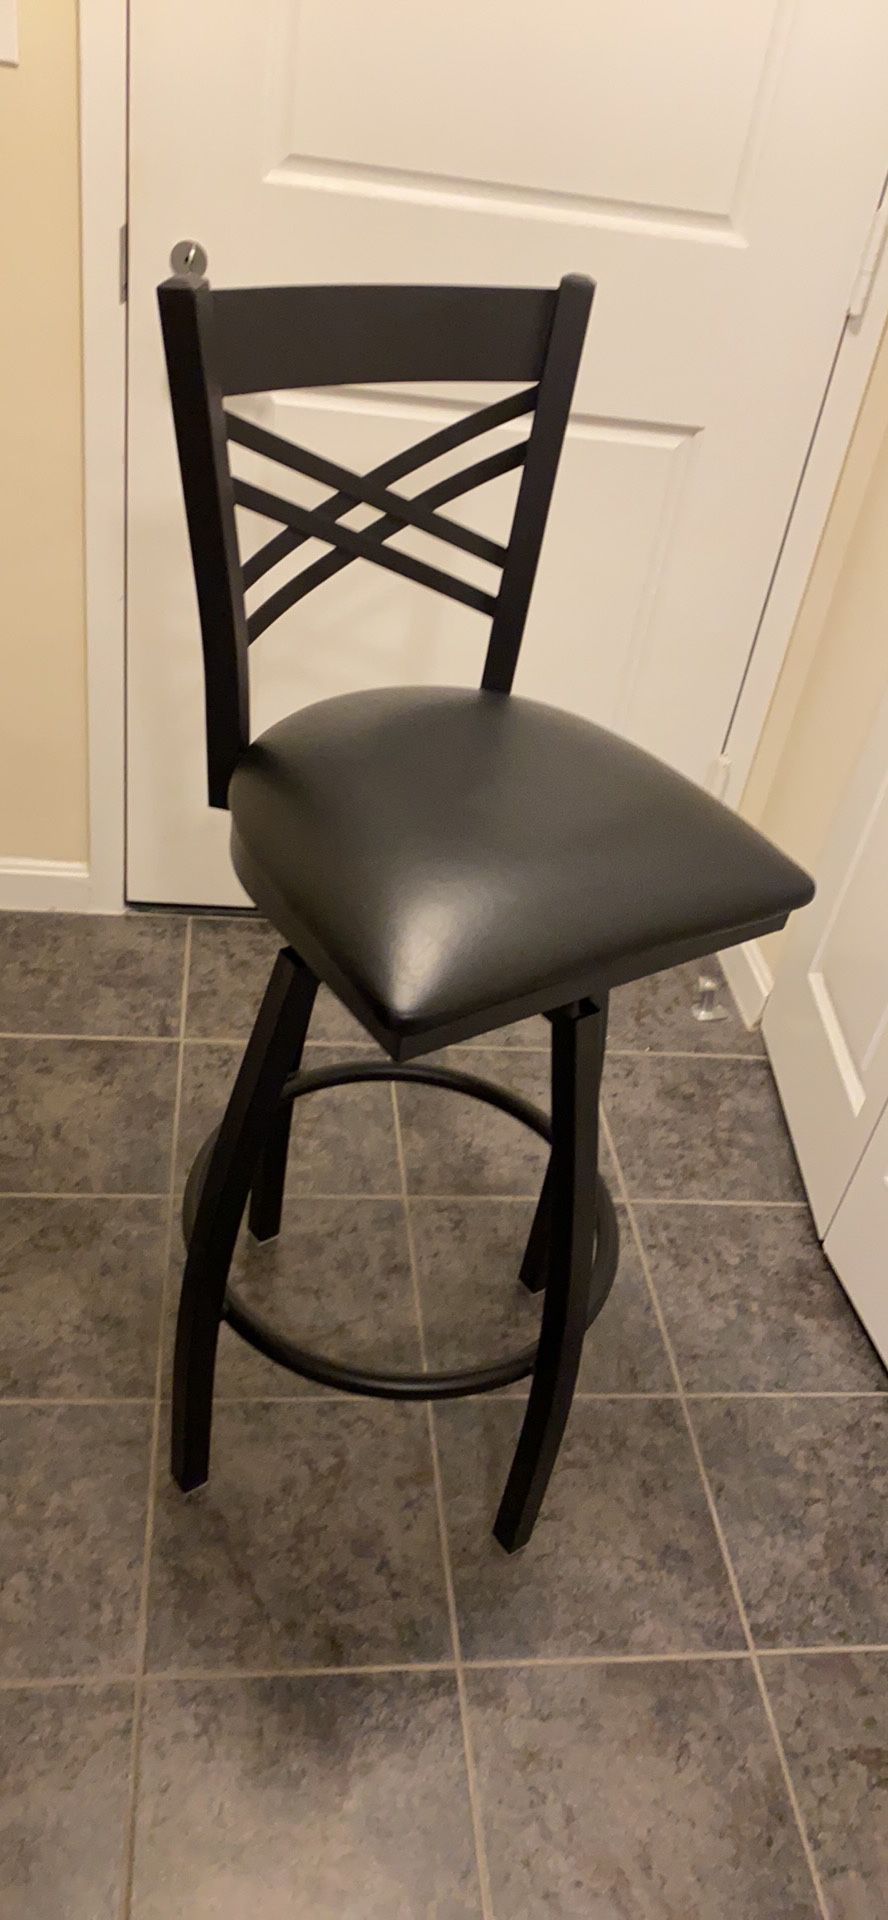 High Bar Top Chair NEW PRICE!